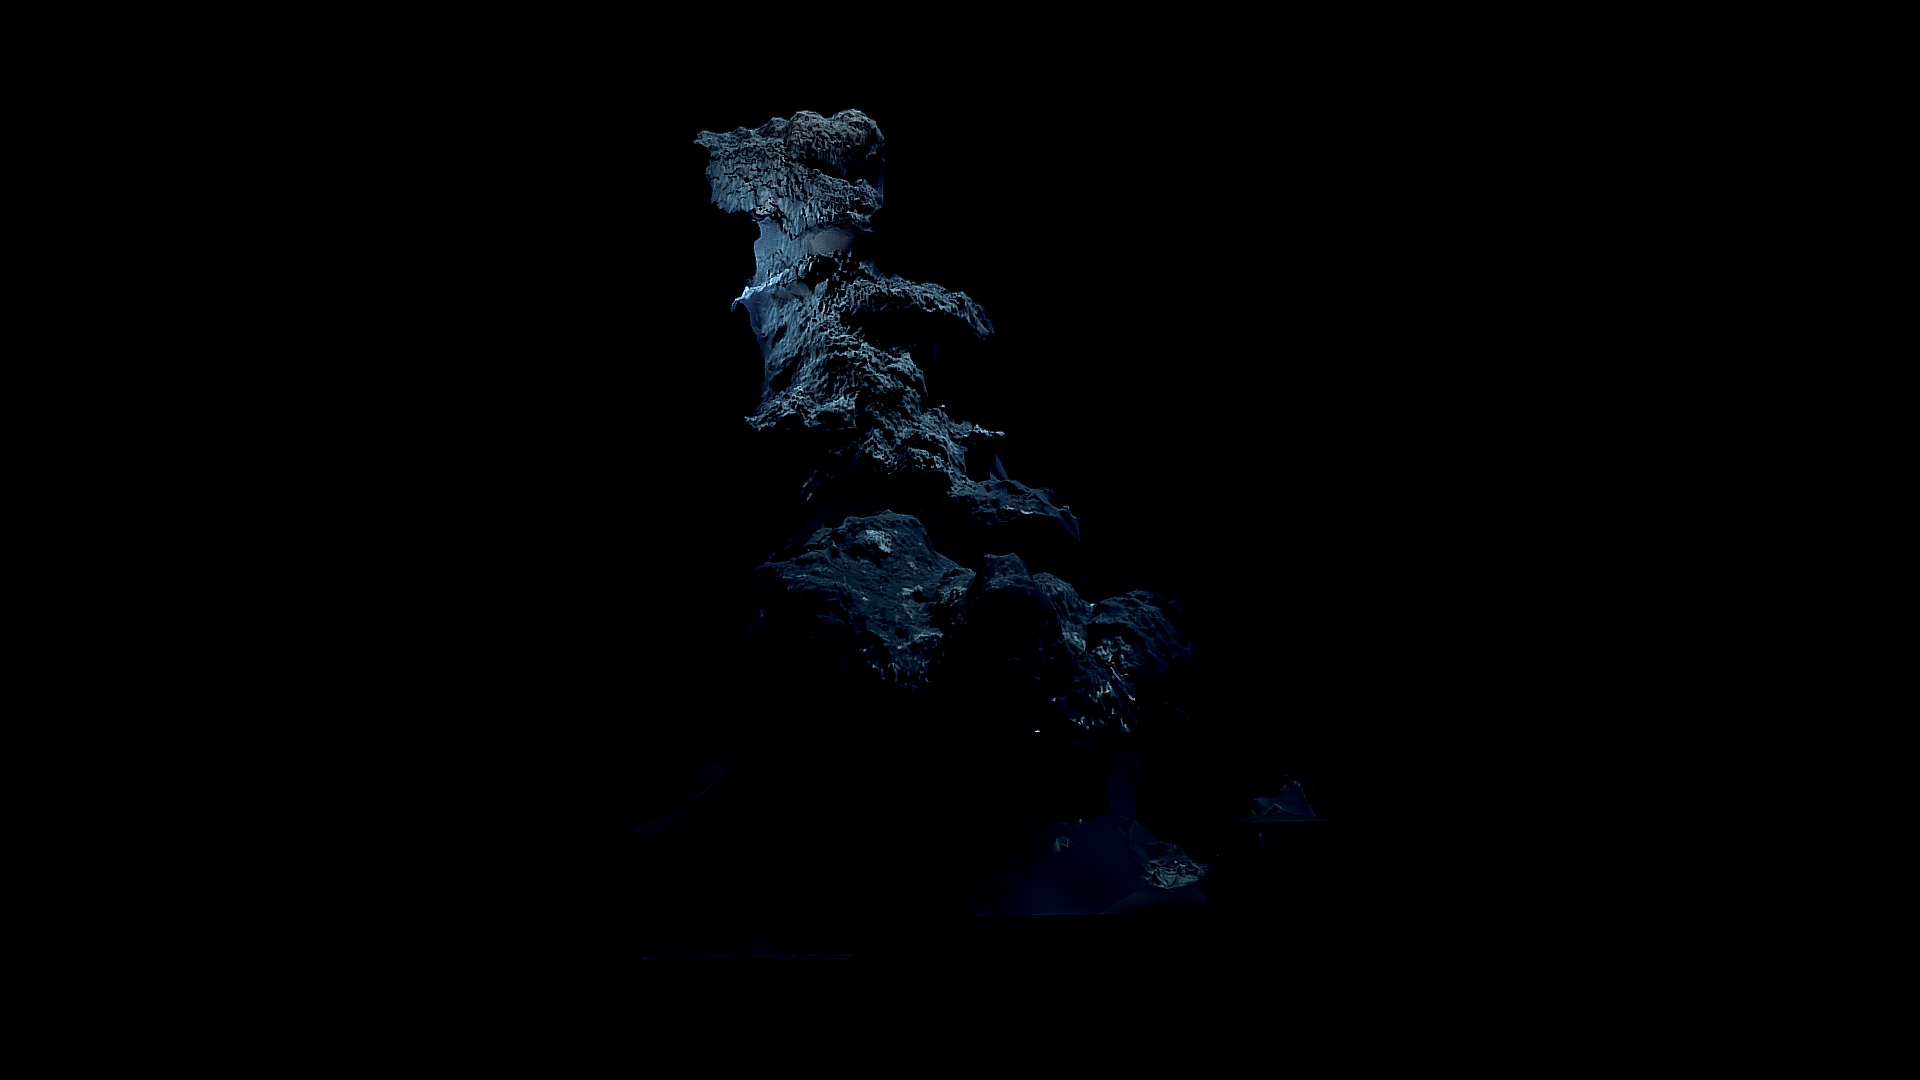 3D model Low Poly Deep Sea Hydrothermal Vent #2 - This is a 3D model of the Low Poly Deep Sea Hydrothermal Vent #2. The 3D model is about a rock formation in the dark.